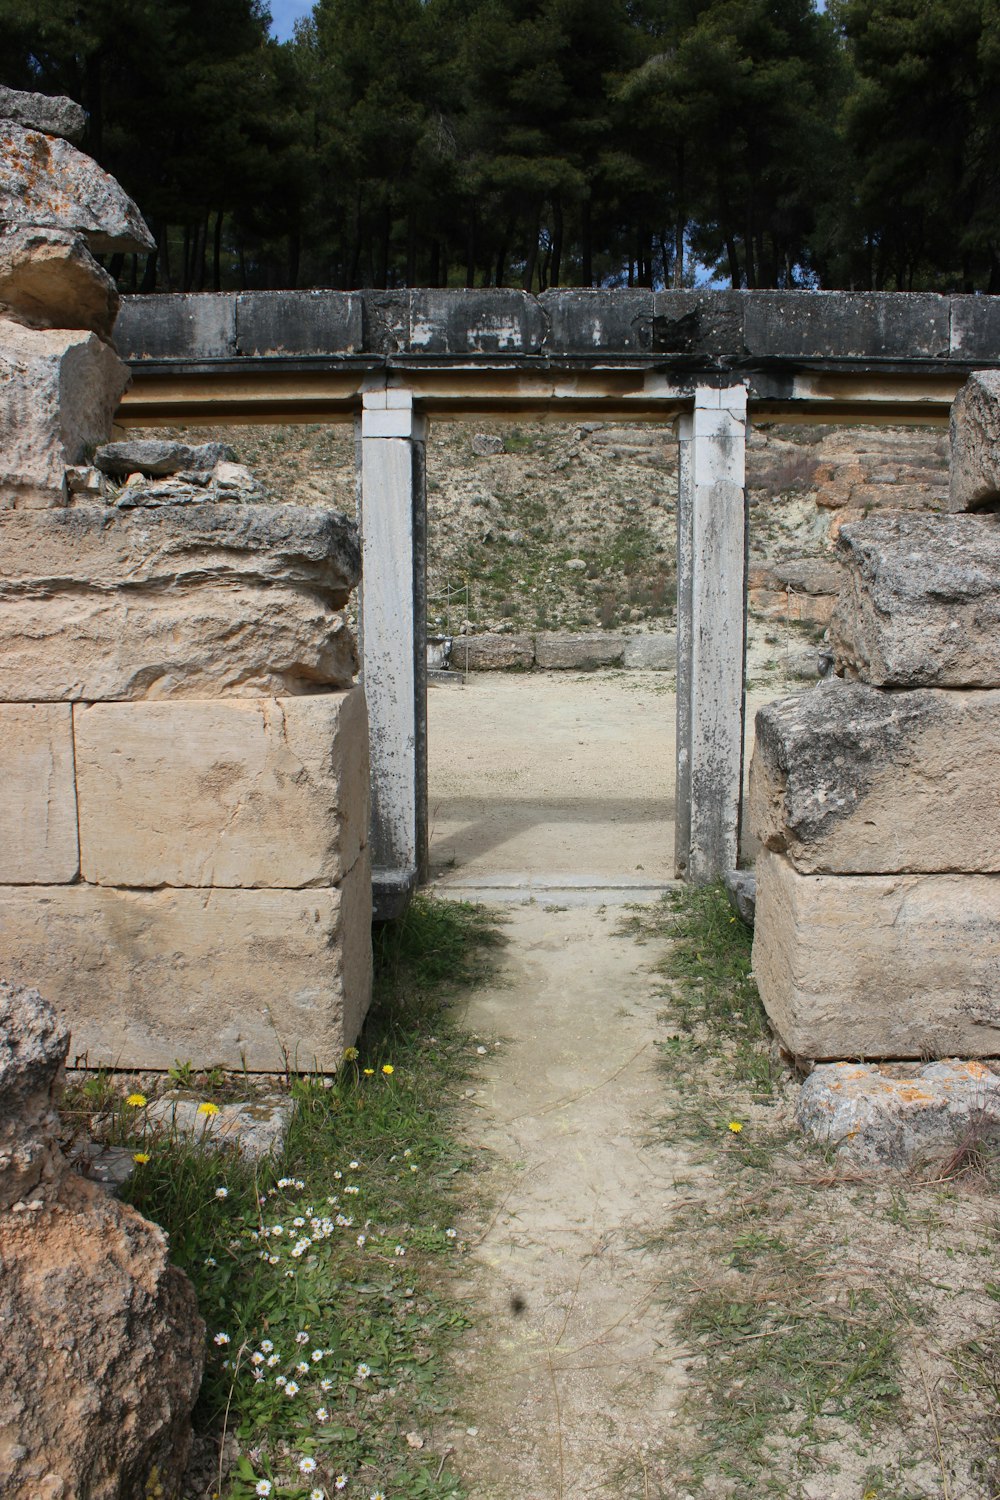 a stone structure with two doors in it